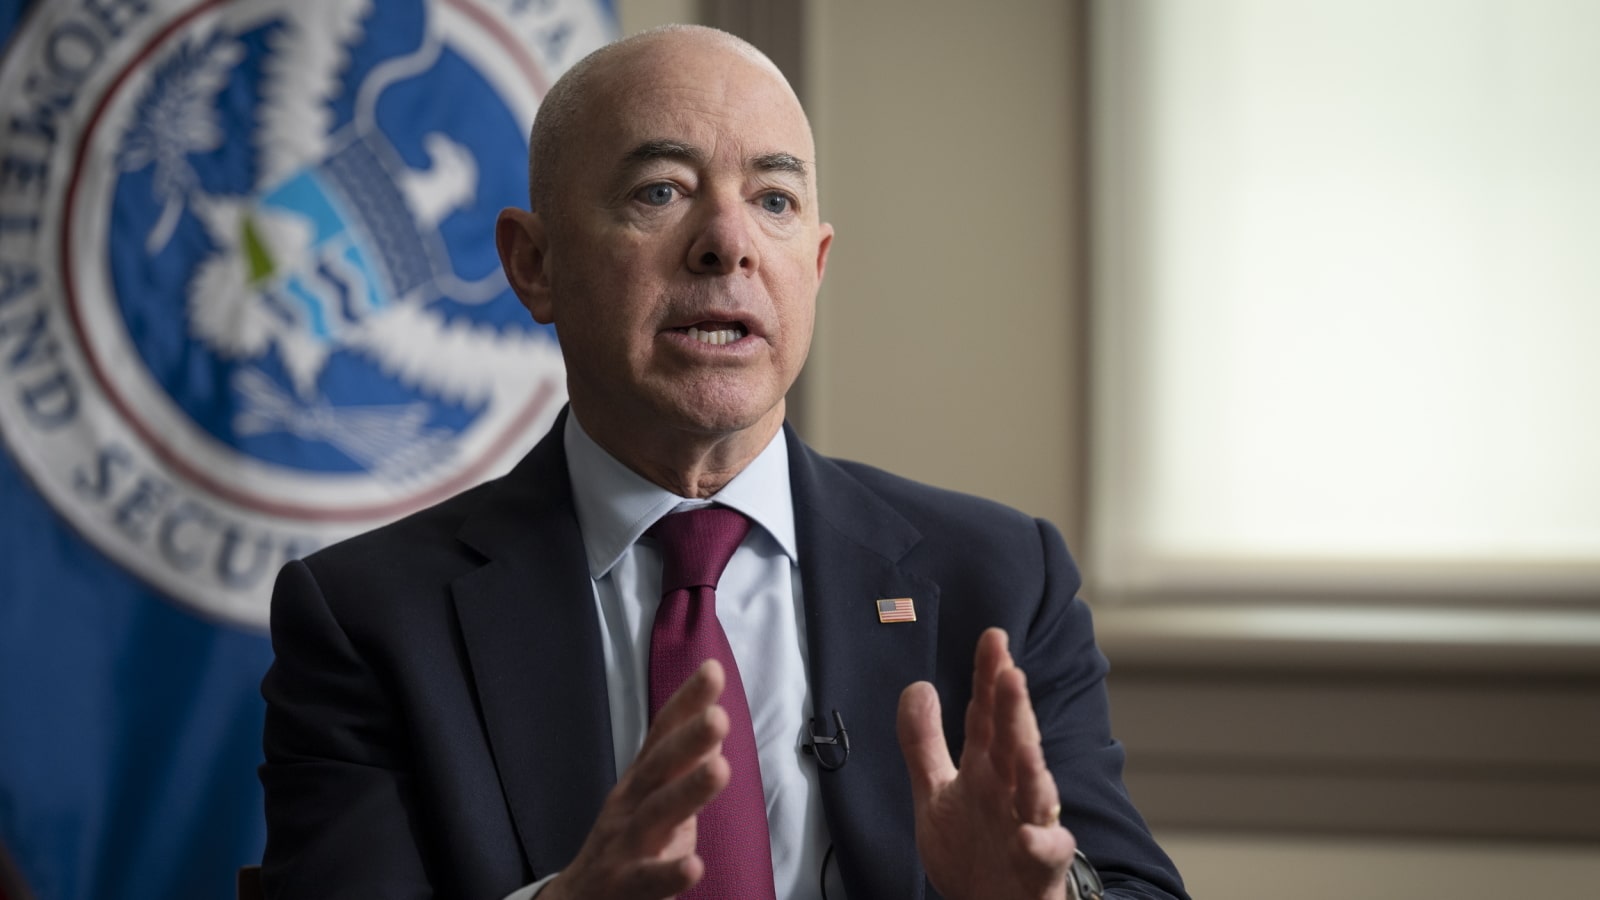 Washington, D.C. (June 14, 2021) Homeland Security Secretary Alejandro Mayorkas participates in an interview with Michael Isikoff from Yahoo News.